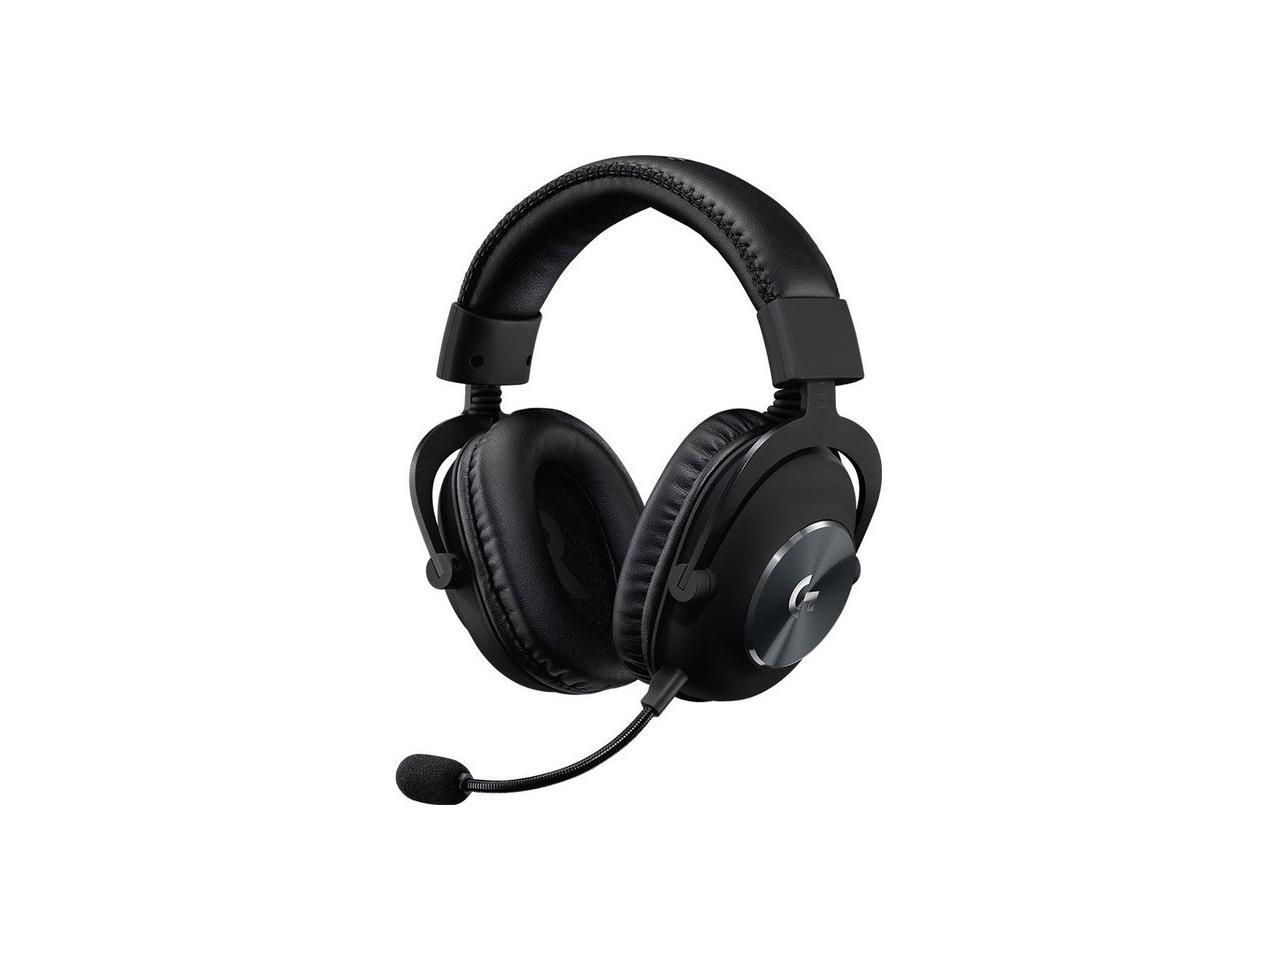 Logitech - G PRO X WIRELESS 981-000906 DTS Headphone:X 2.0 Gaming Headset for Windows with Blue VO!CE Mic Filter Tech and LIGHTSPEED Wireless - Black